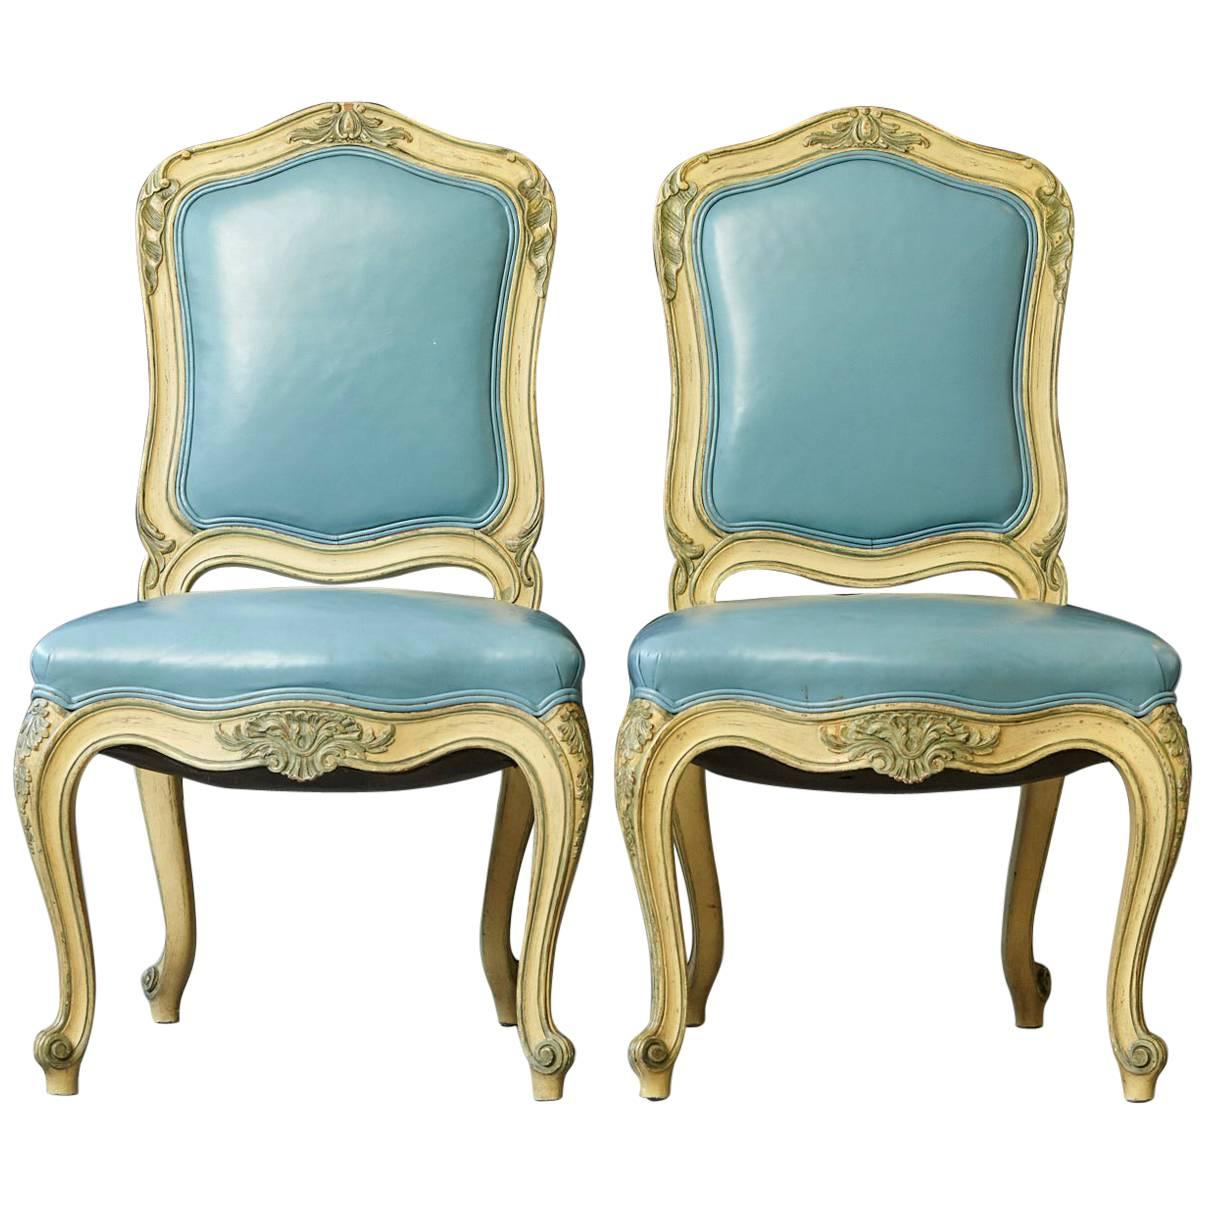 Pair of French Louis XV Style Side Chairs Upholstered in Powder Blue Leather For Sale